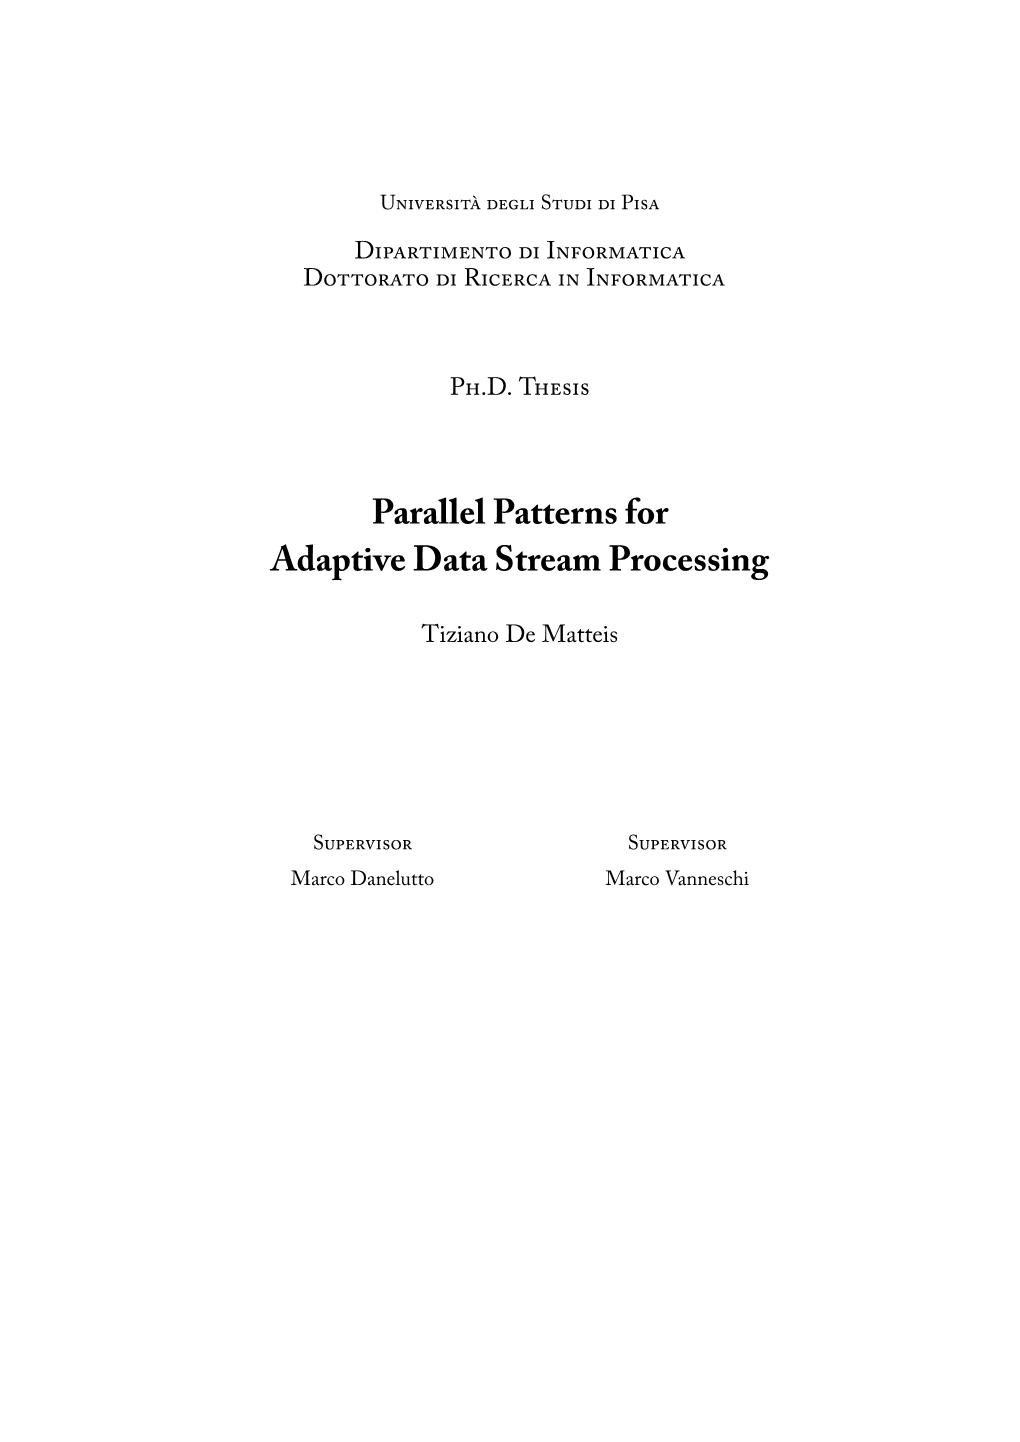 Parallel Patterns for Adaptive Data Stream Processing